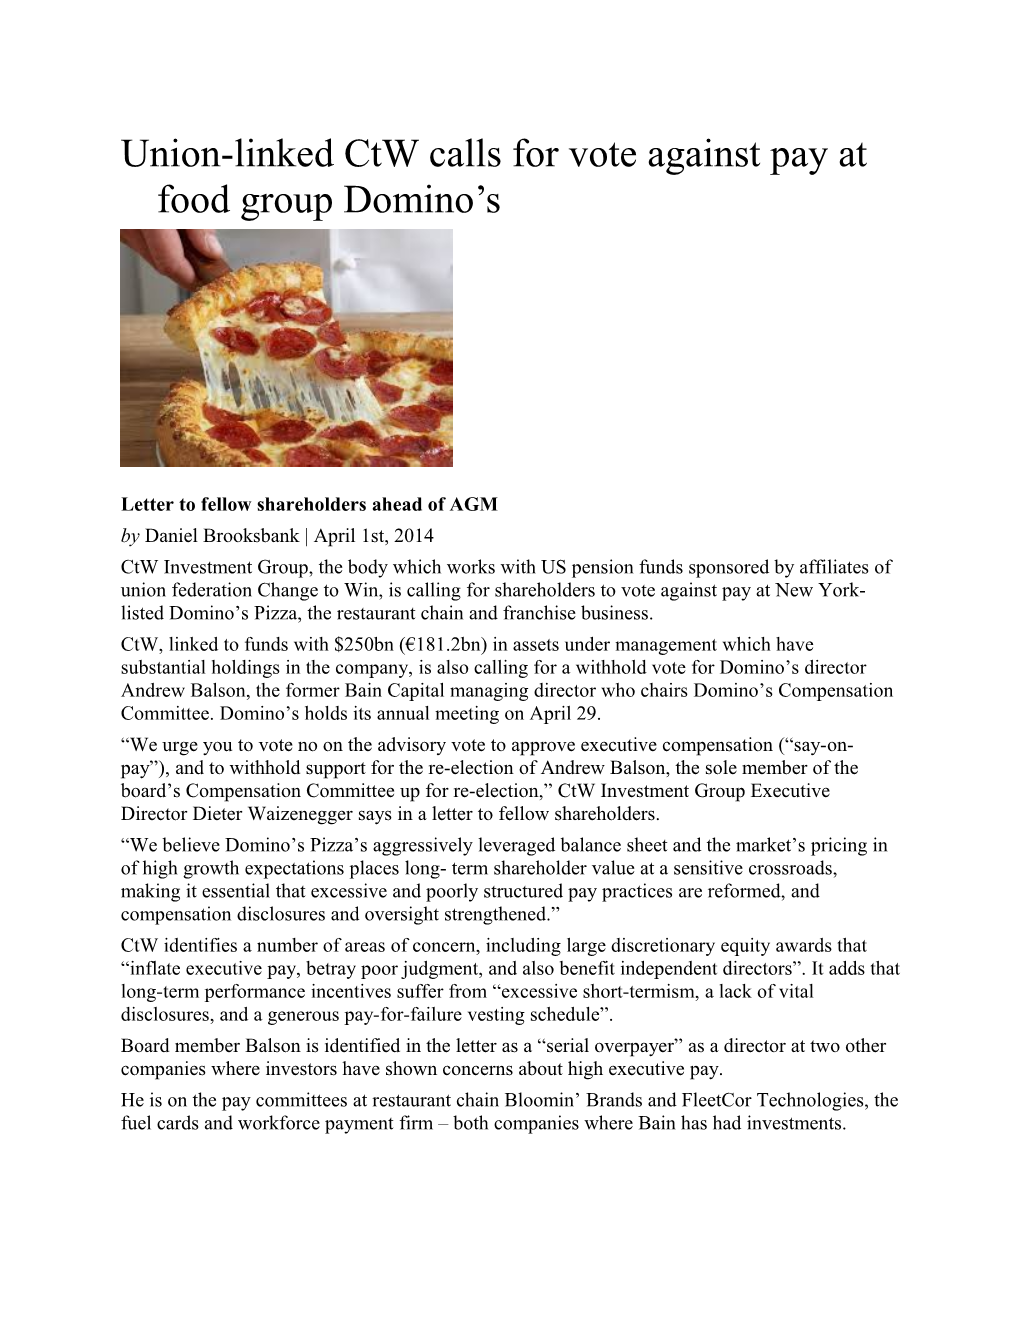 Union-Linked Ctw Calls for Vote Against Pay at Food Group Domino S